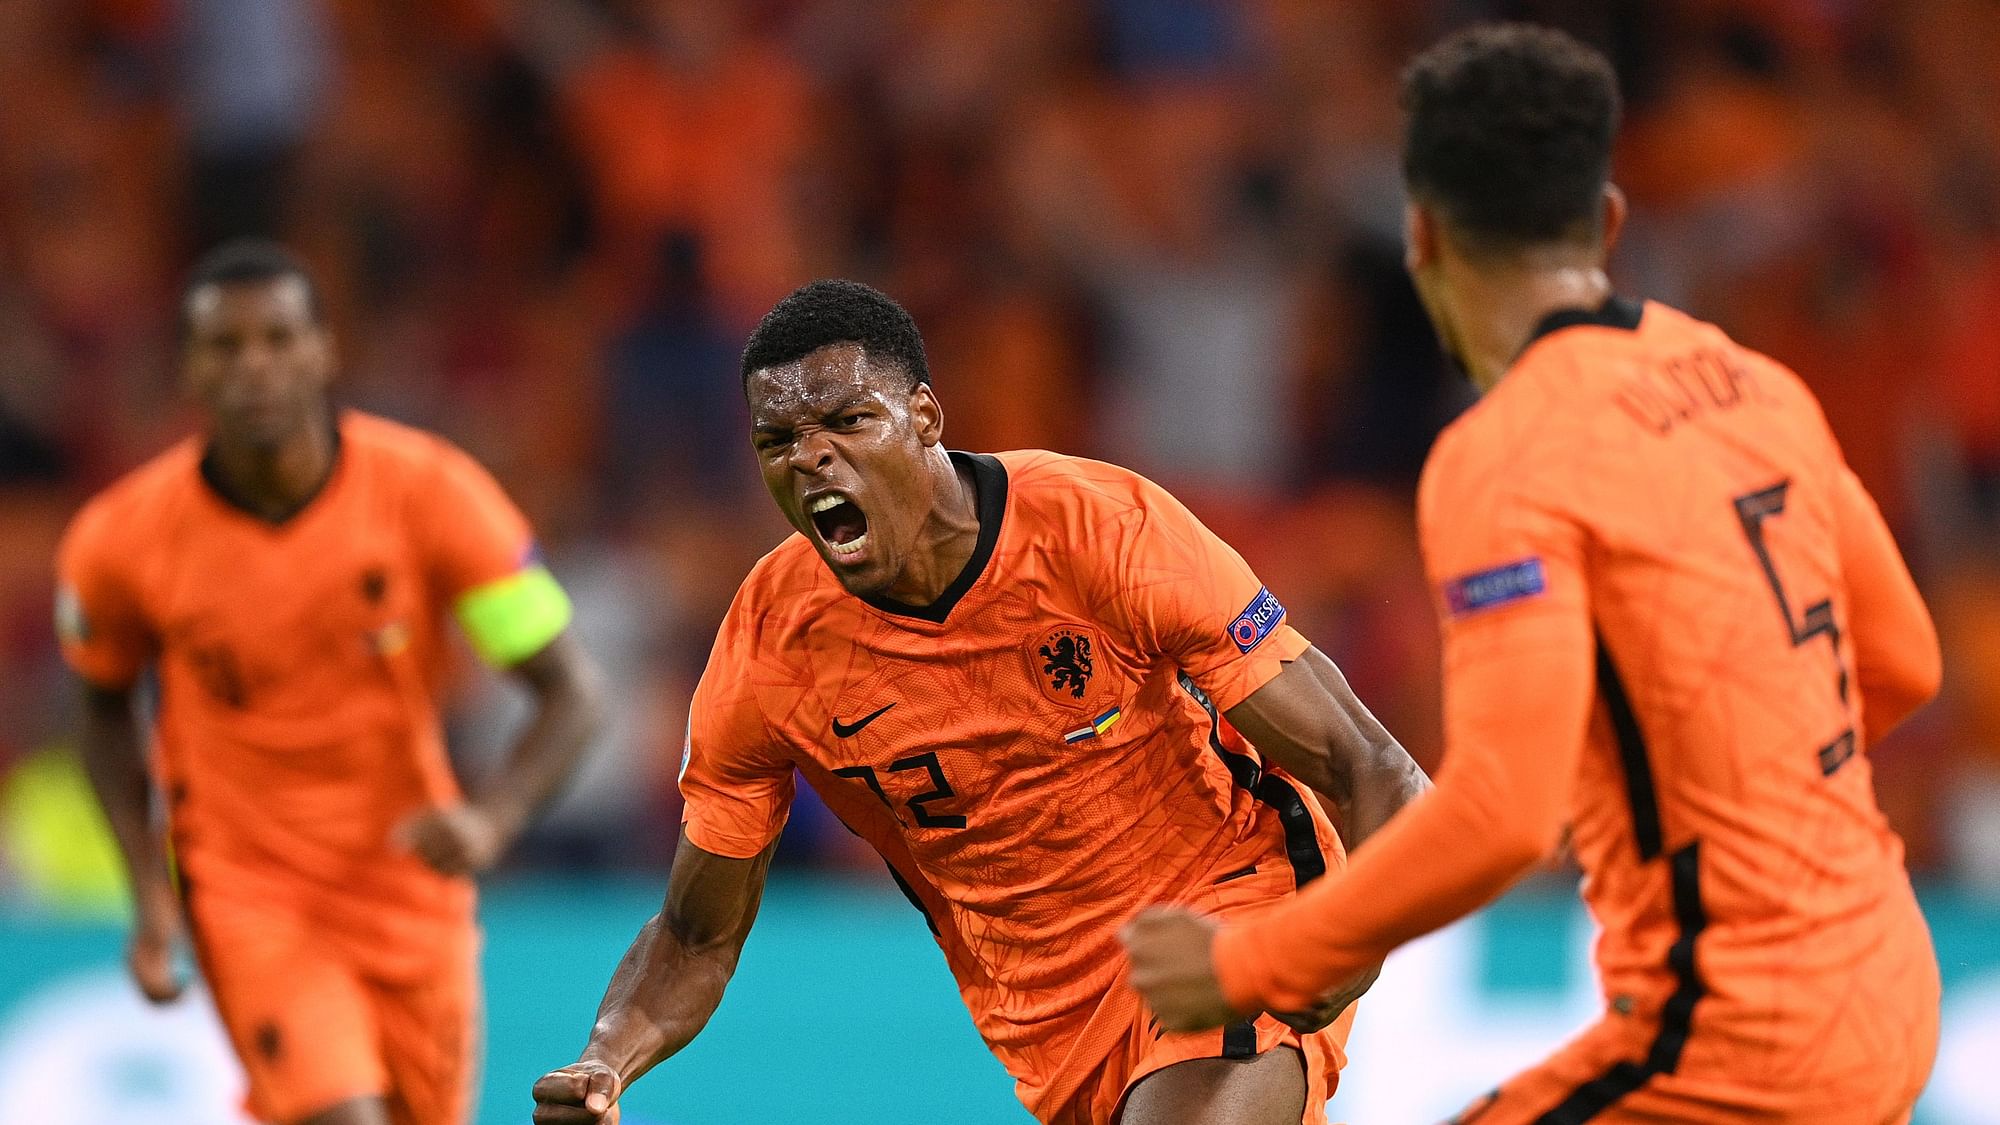 Denzel Dumfries, who scored his first international goal, clinched the contest with a fine header in the closing minutes, as the Royals watched on at the Johan Cruyff Arena.  